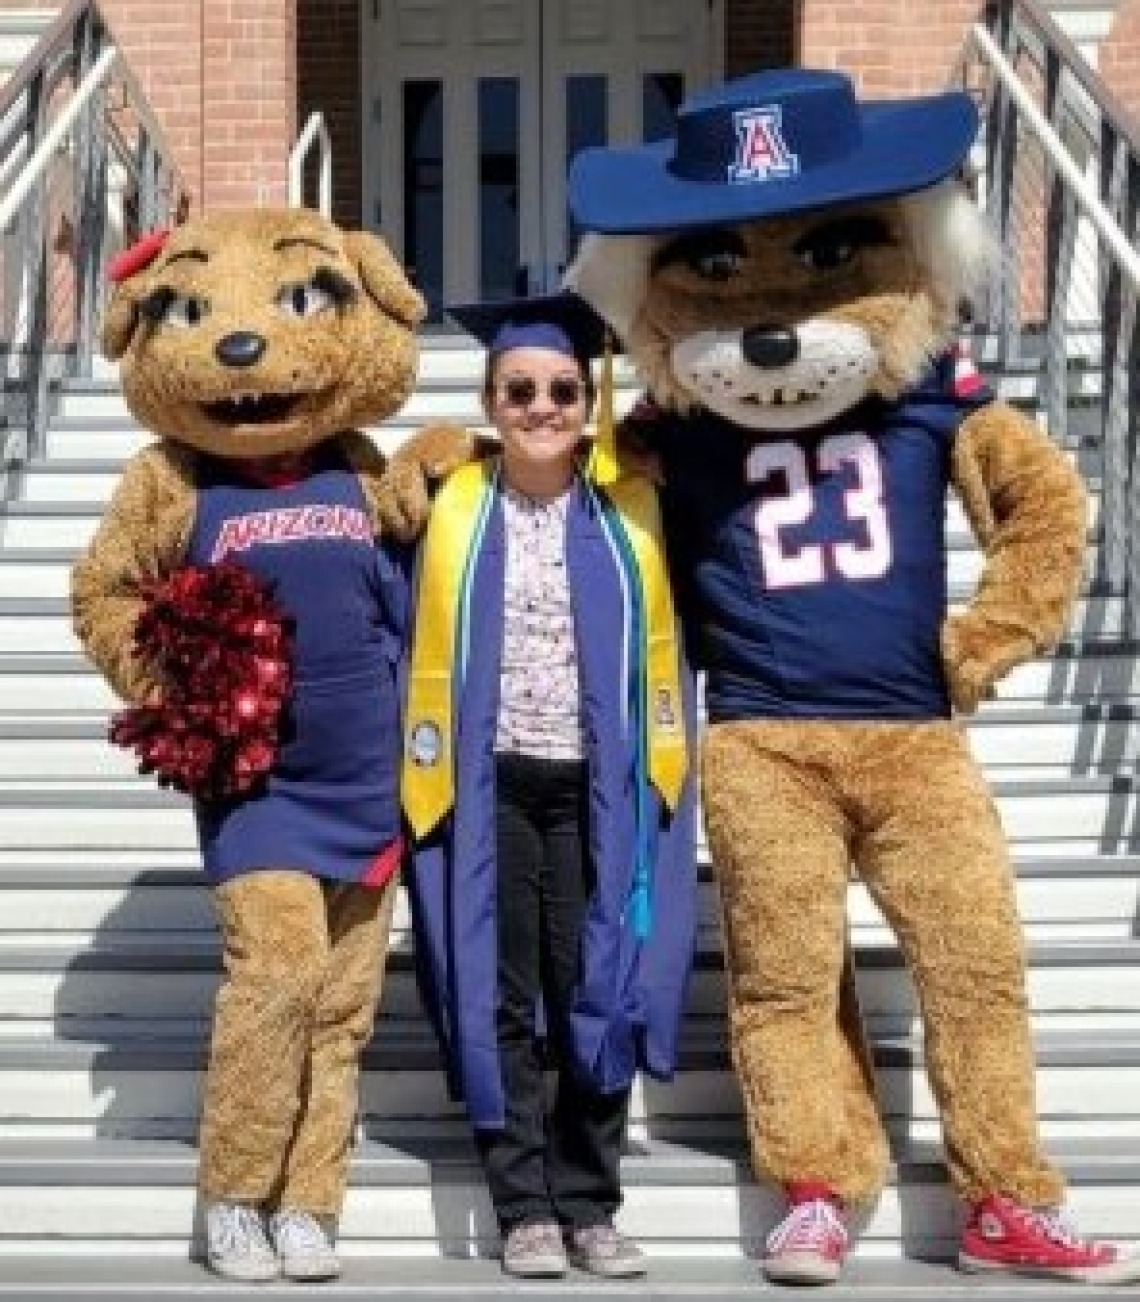 Olivia Bertuca wearing a graduation cap and gown, standing with Wilma and Wilbur Wildcat